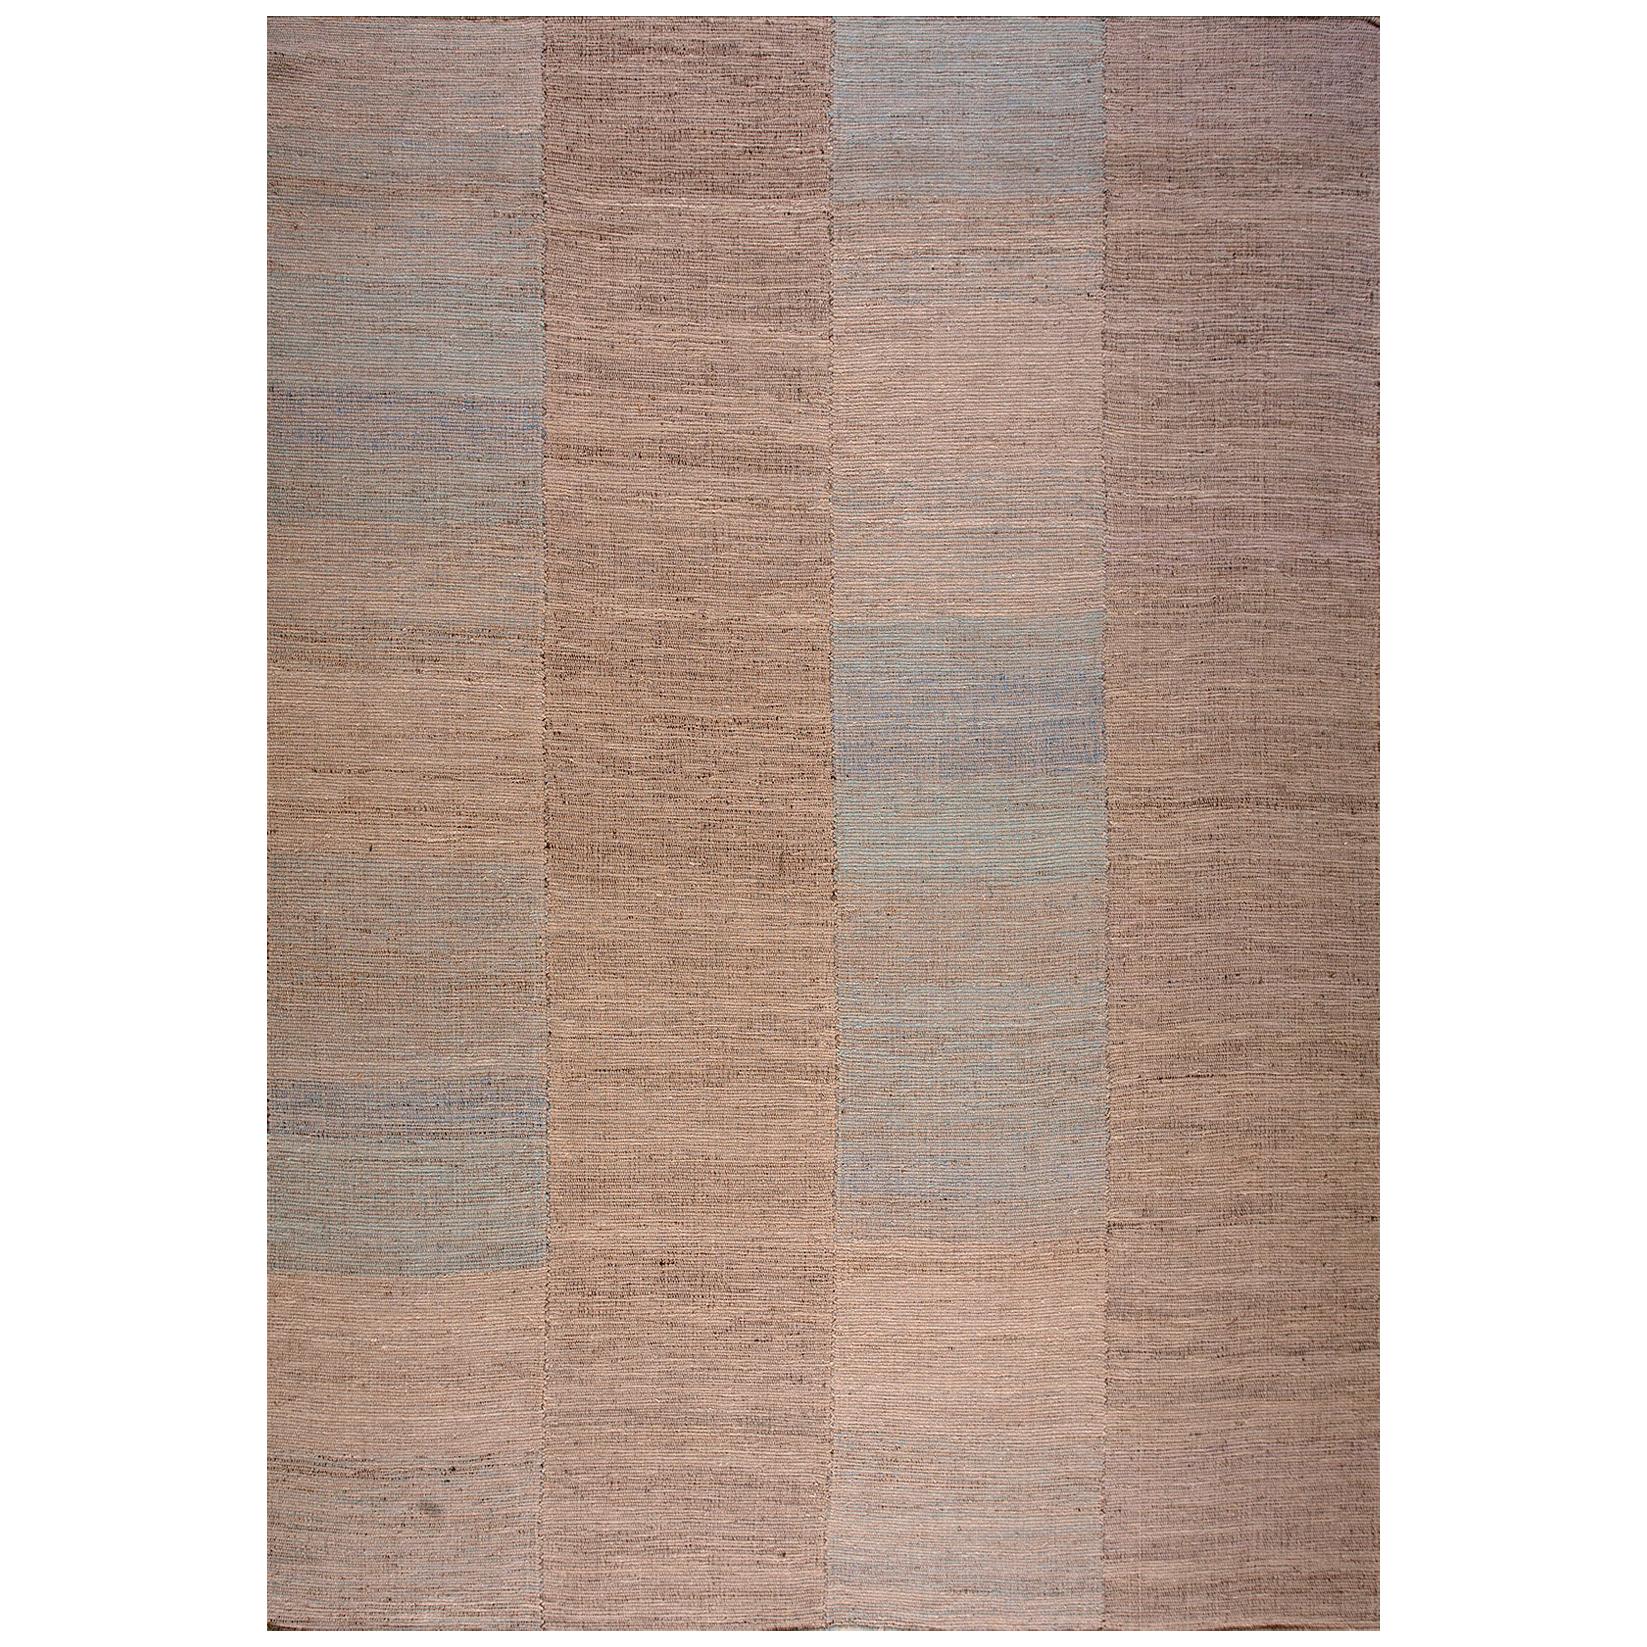 Contemporary Handwoven Wool Shaker Style Flat Weave Carpet 9' 2" x 12' 4"